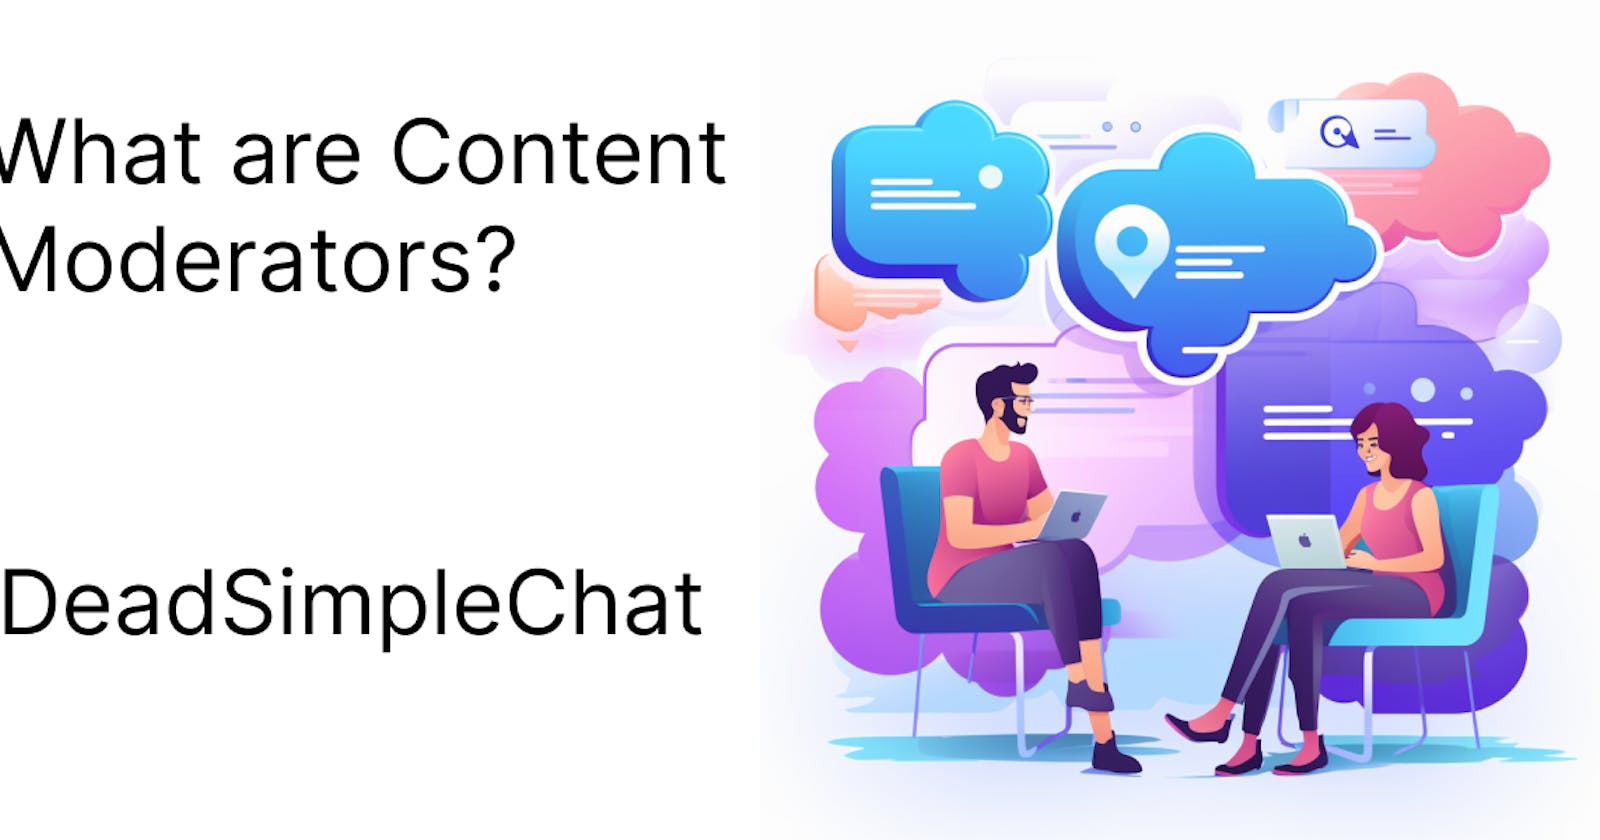 What are Content Moderators?